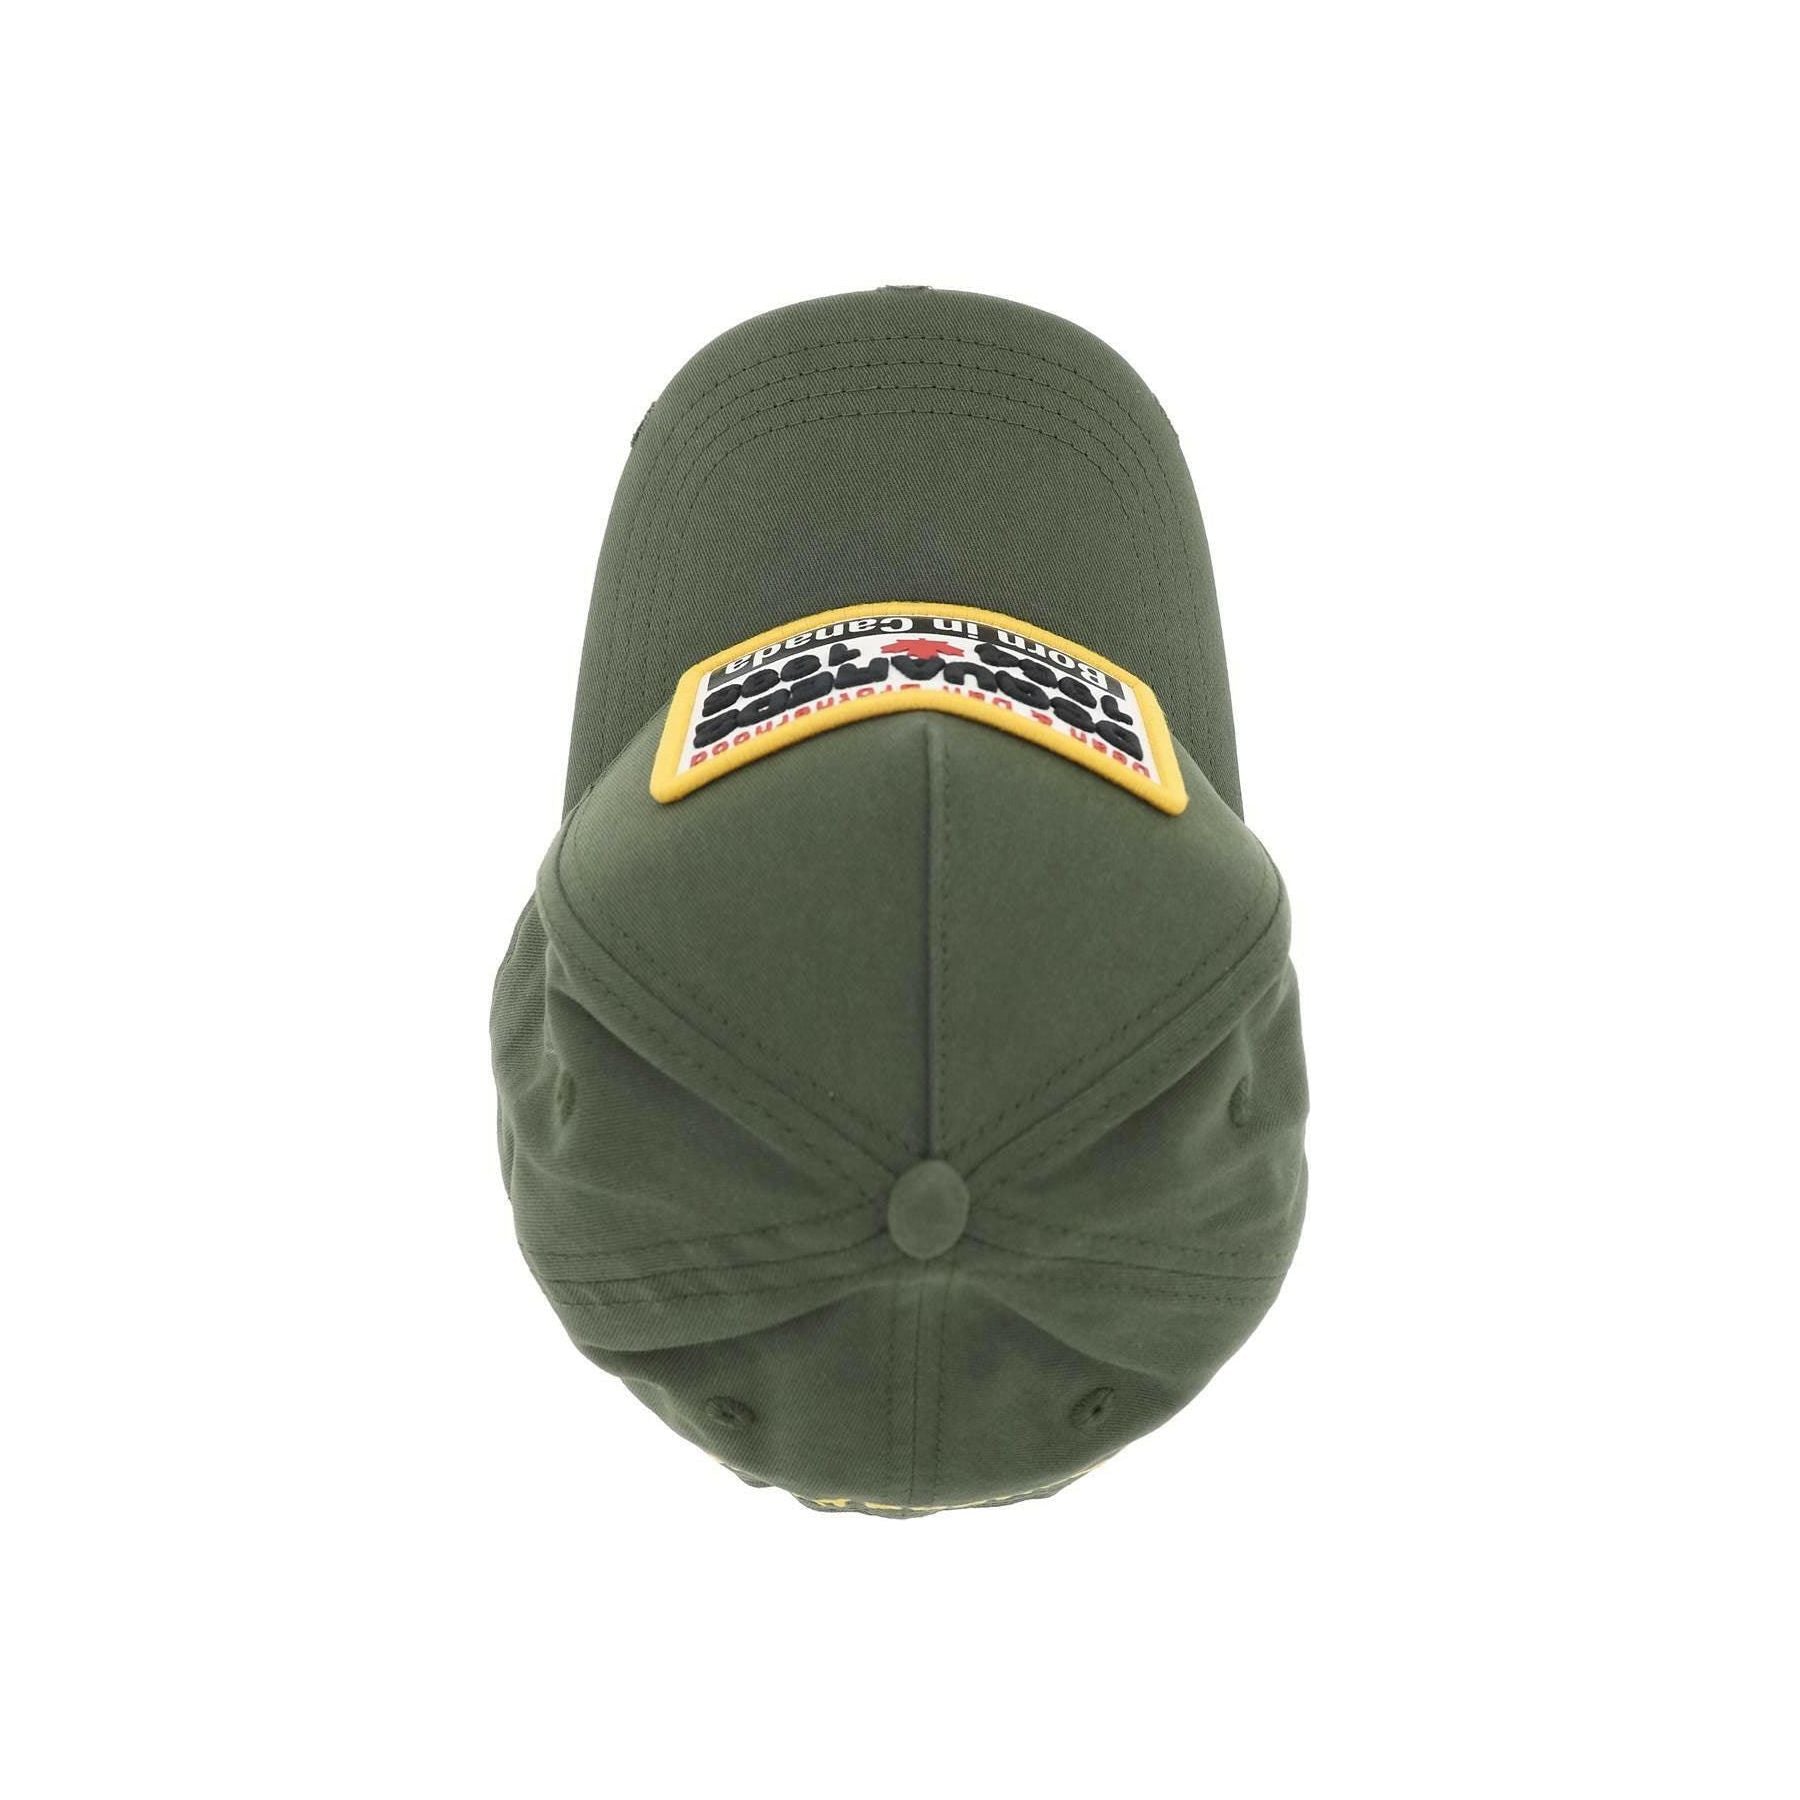 Military Green Baseball Cap With Logoed Patch DSQUARED2 JOHN JULIA.